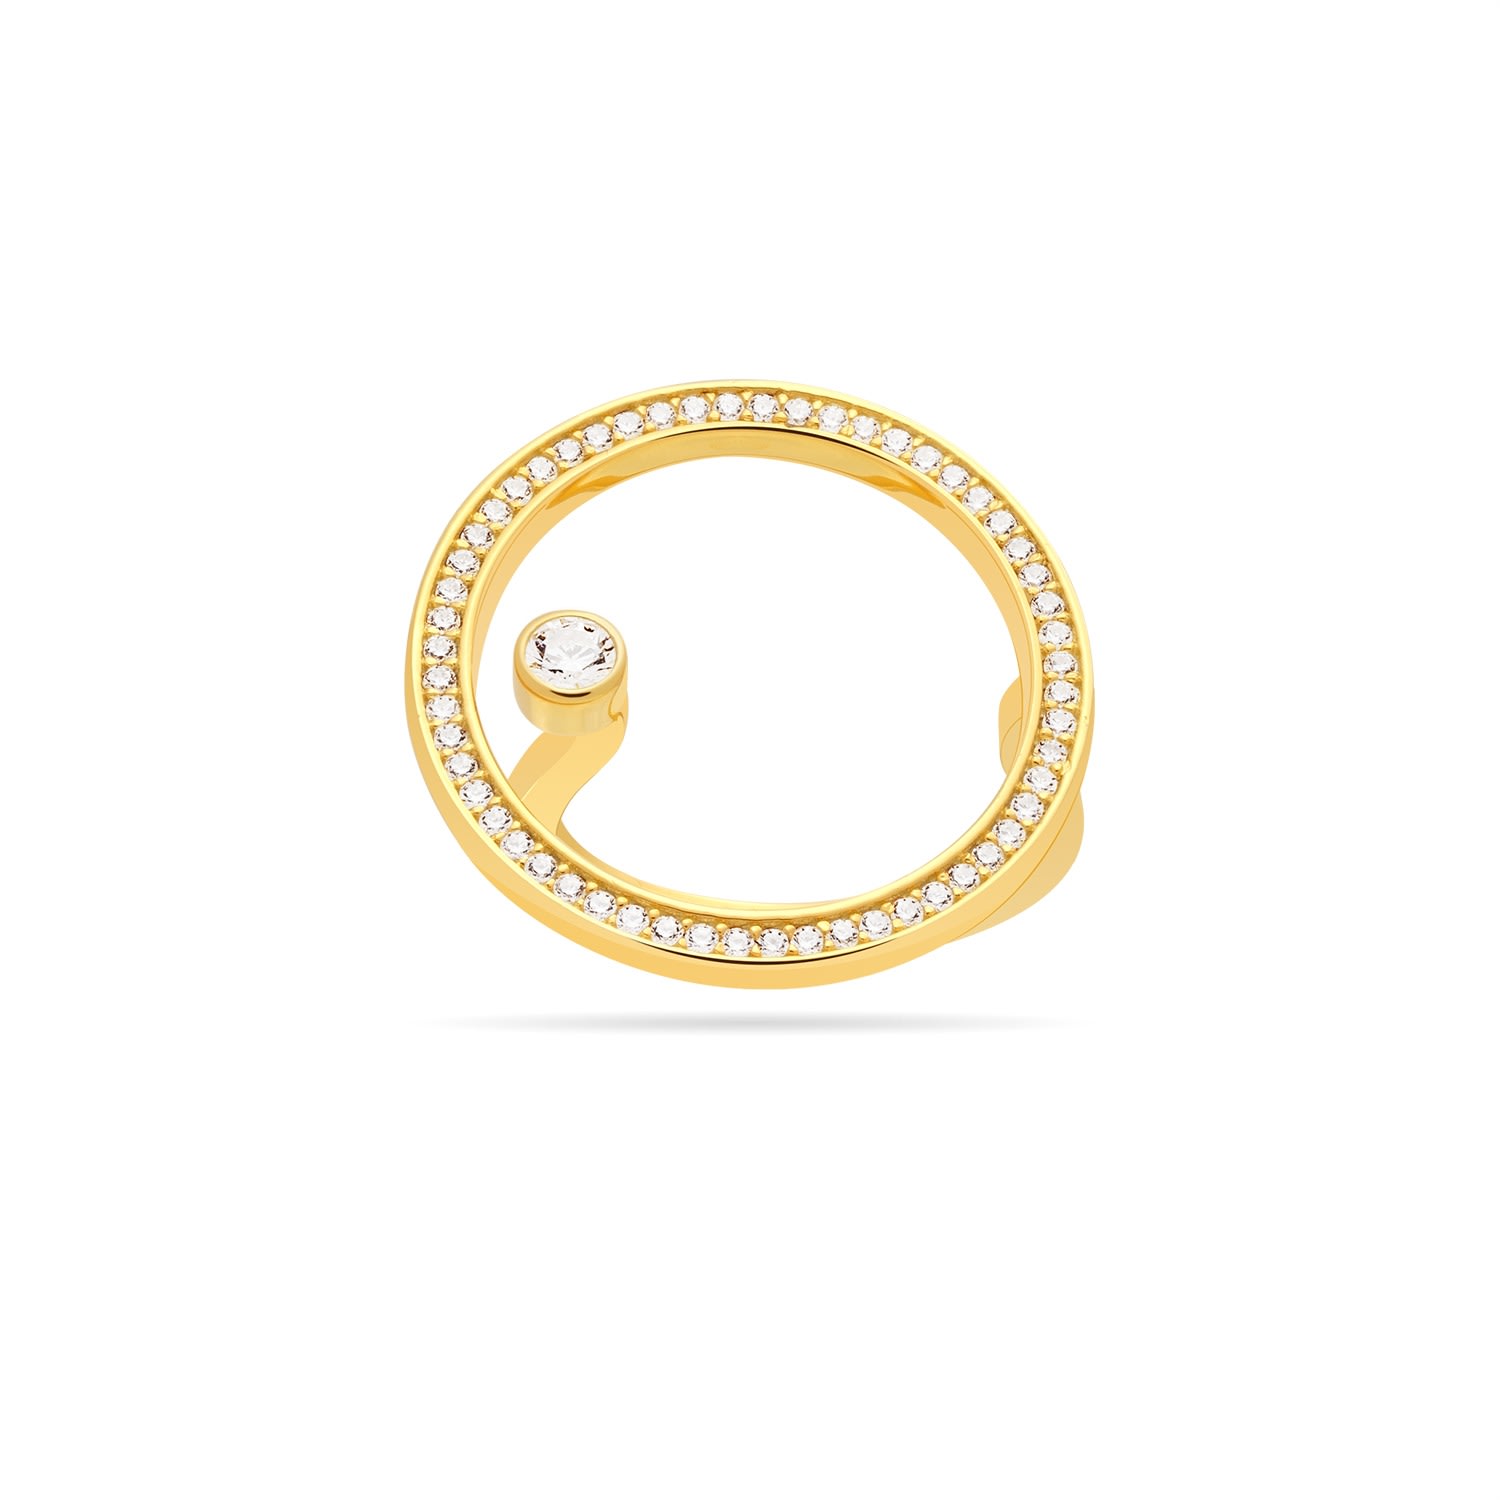 Women’s Large Open Circle Ring With Floating Cz Stud - Gold Meulien